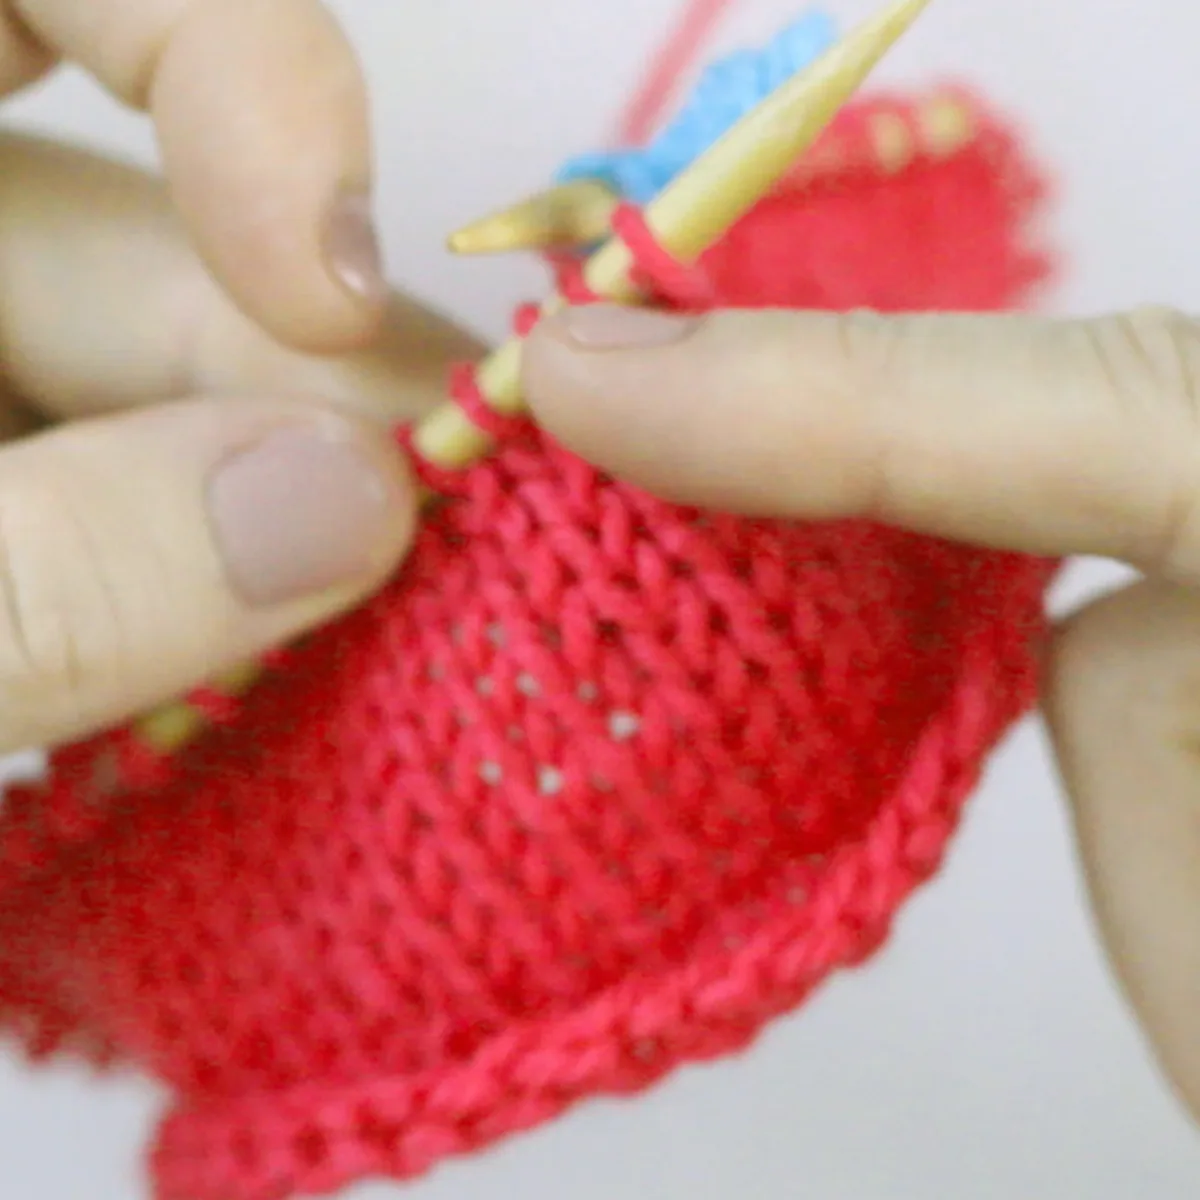 Beginning brim and base area of knitting a strawberry baby hat on circular needles.